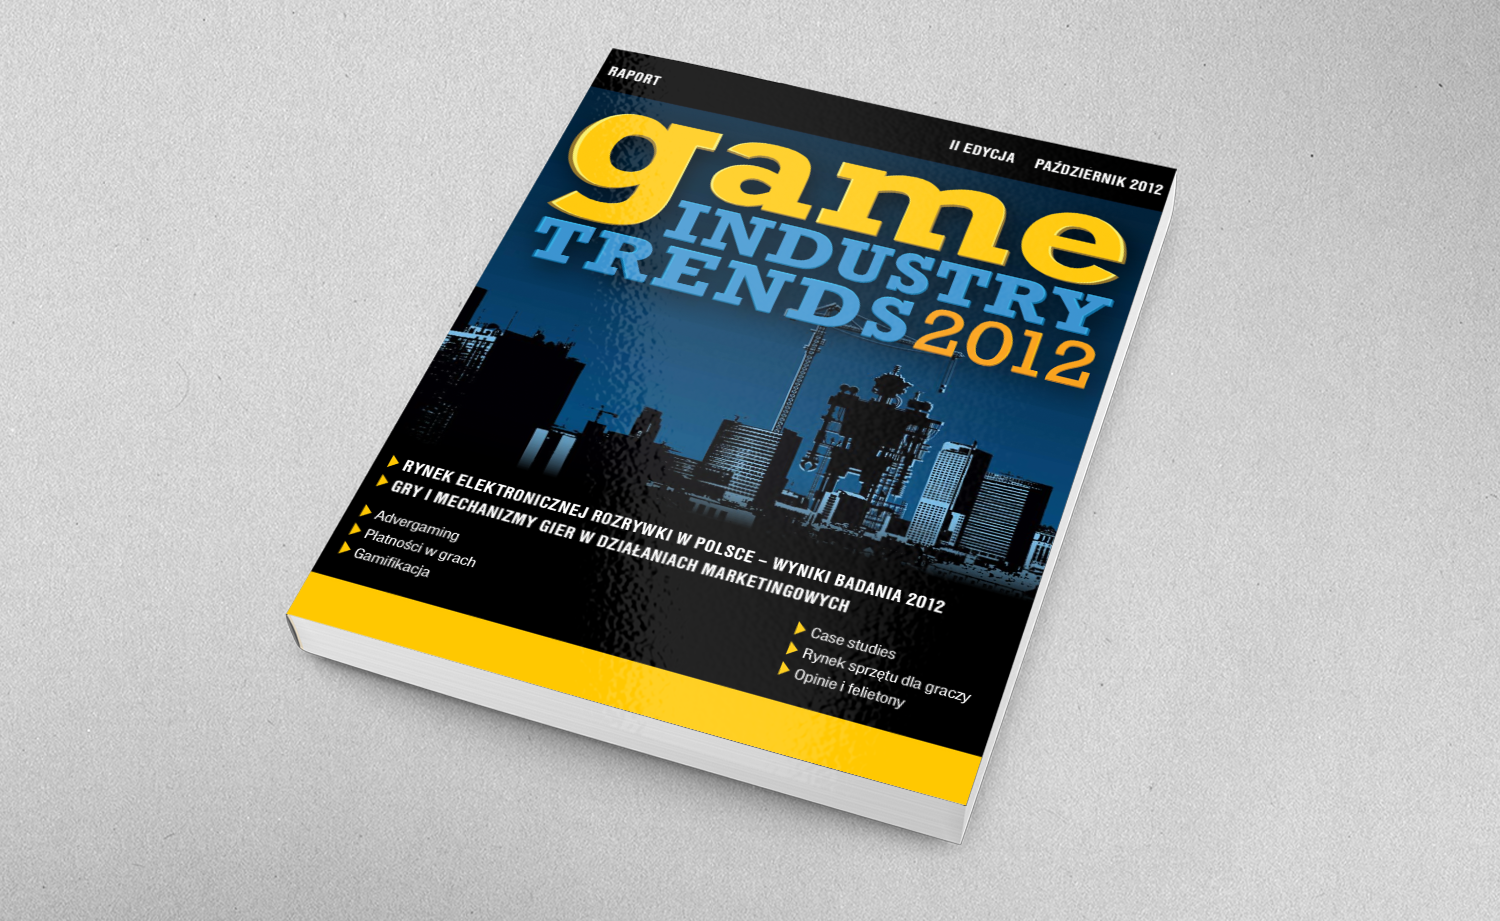 GIT 2012 Report – Games and Gamification